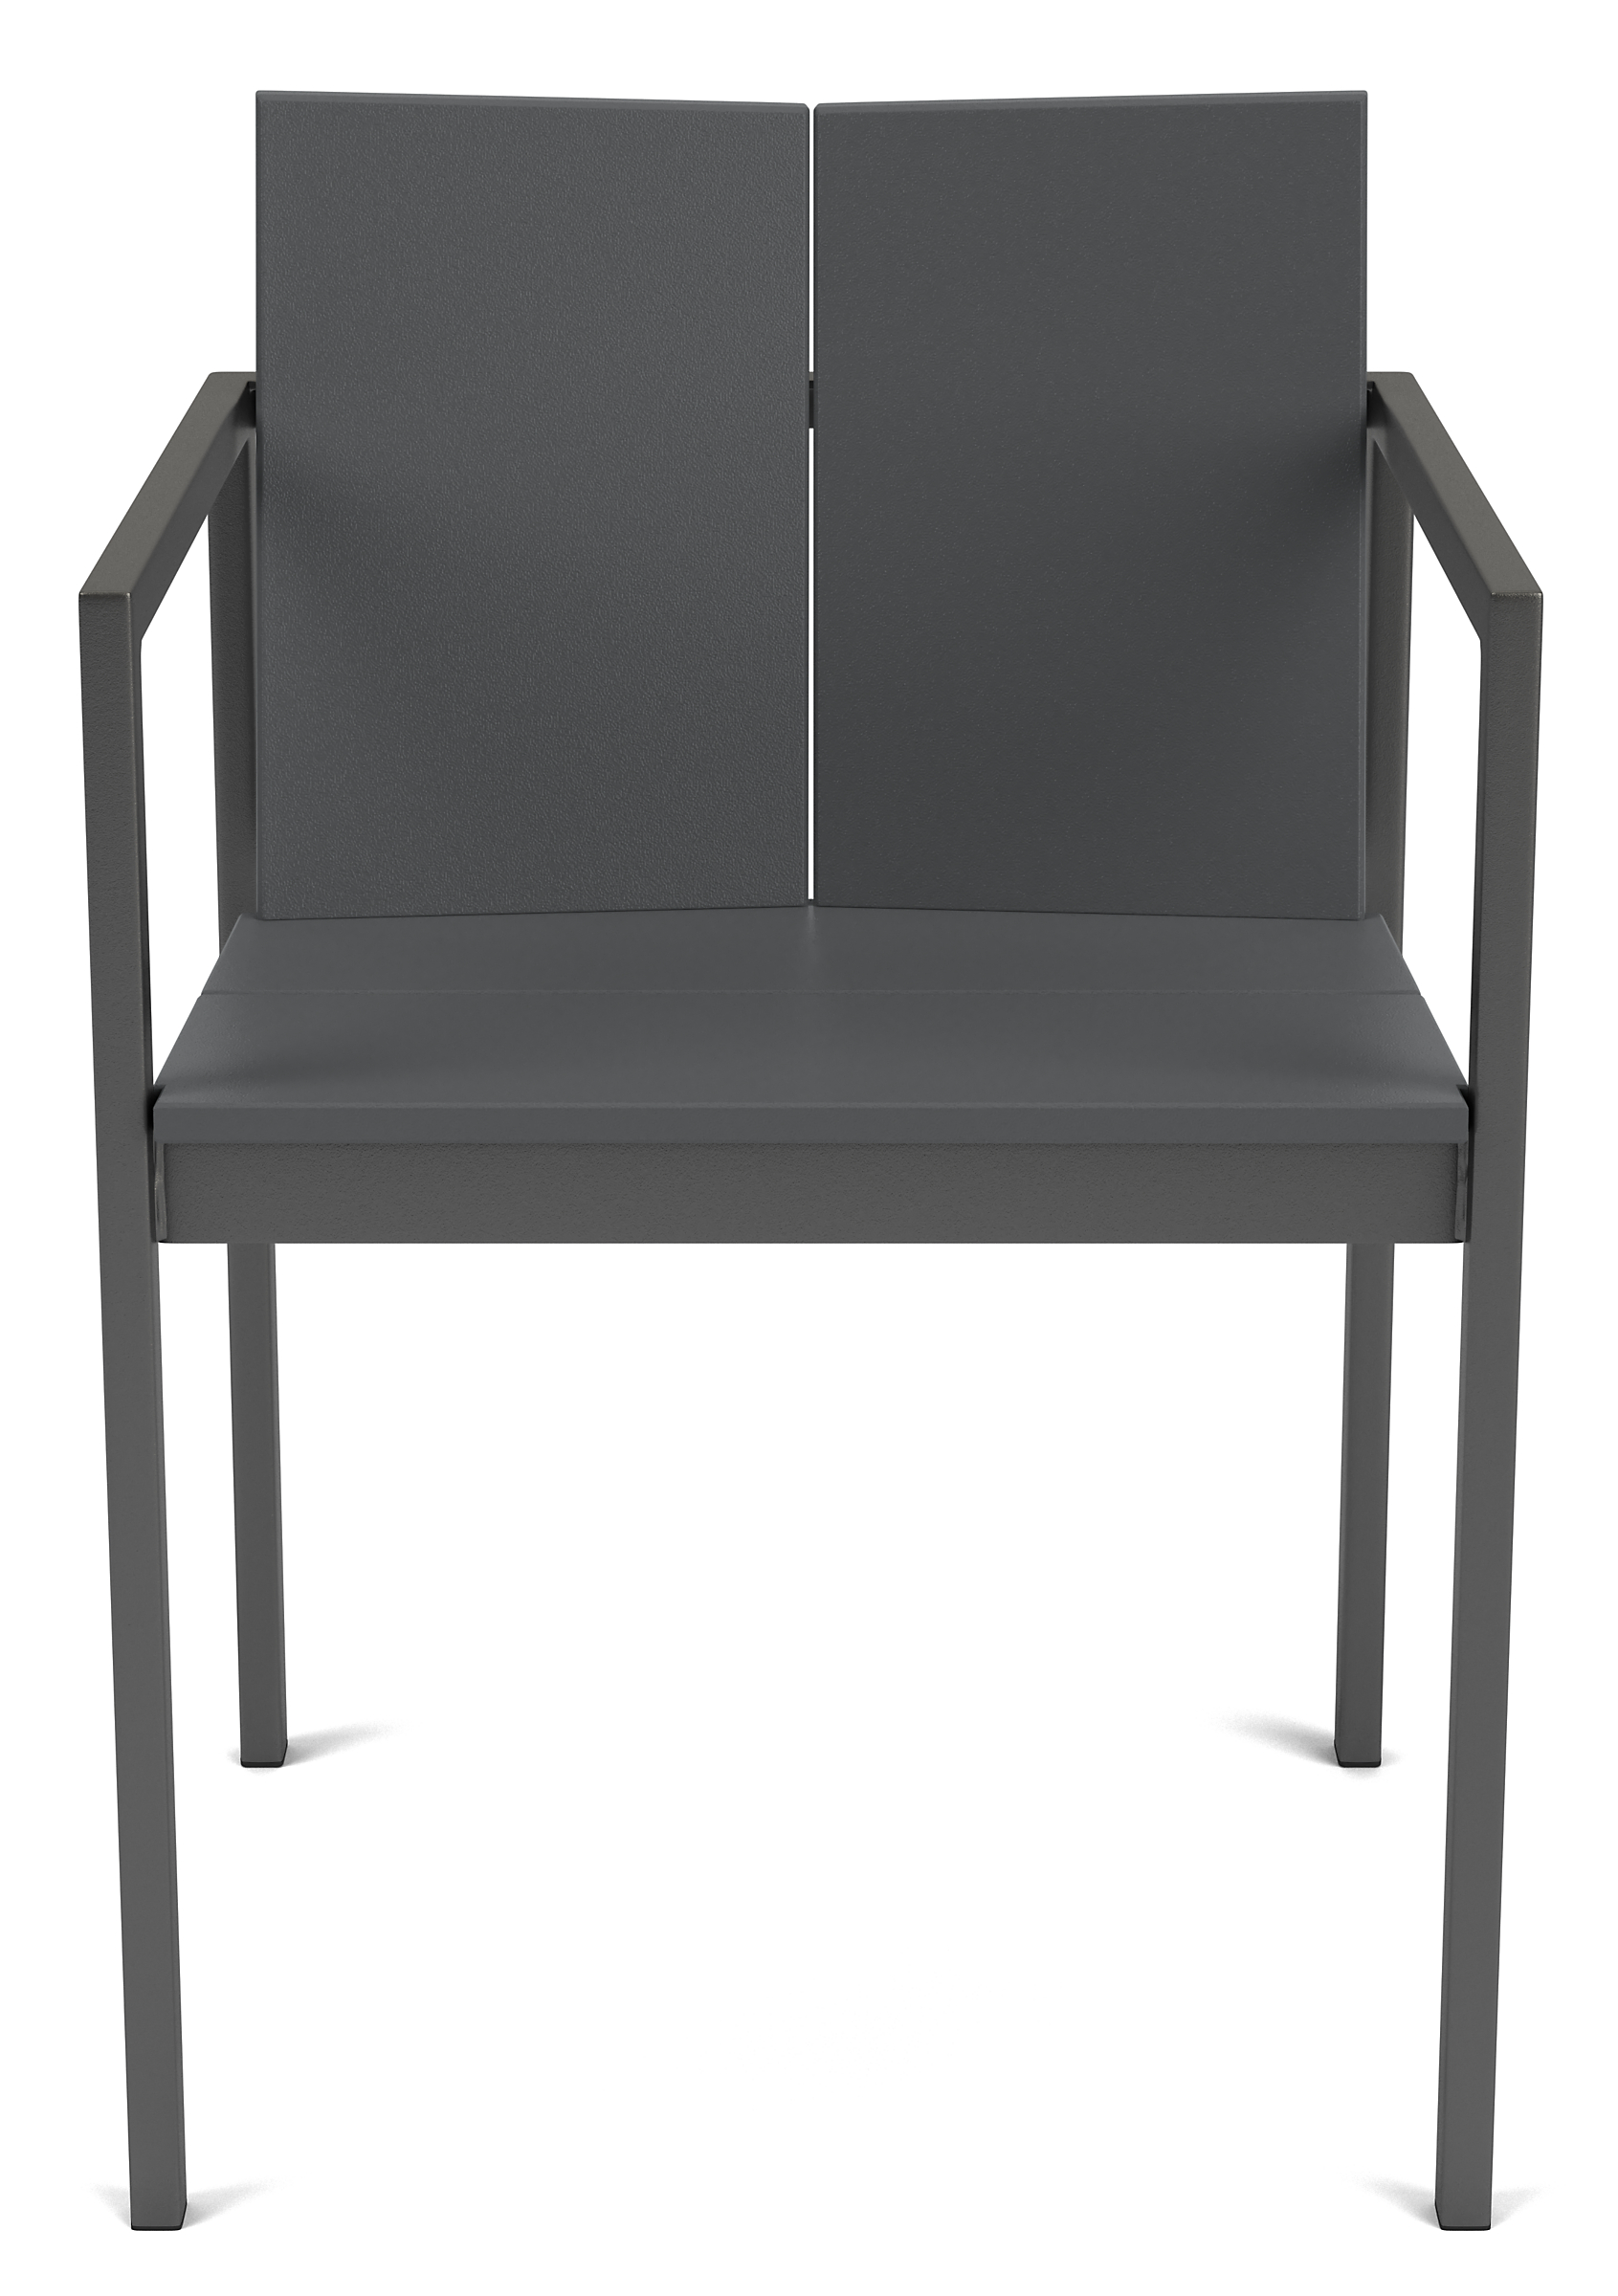 Front view of Mattix Arm Chair in Grey HDPE.